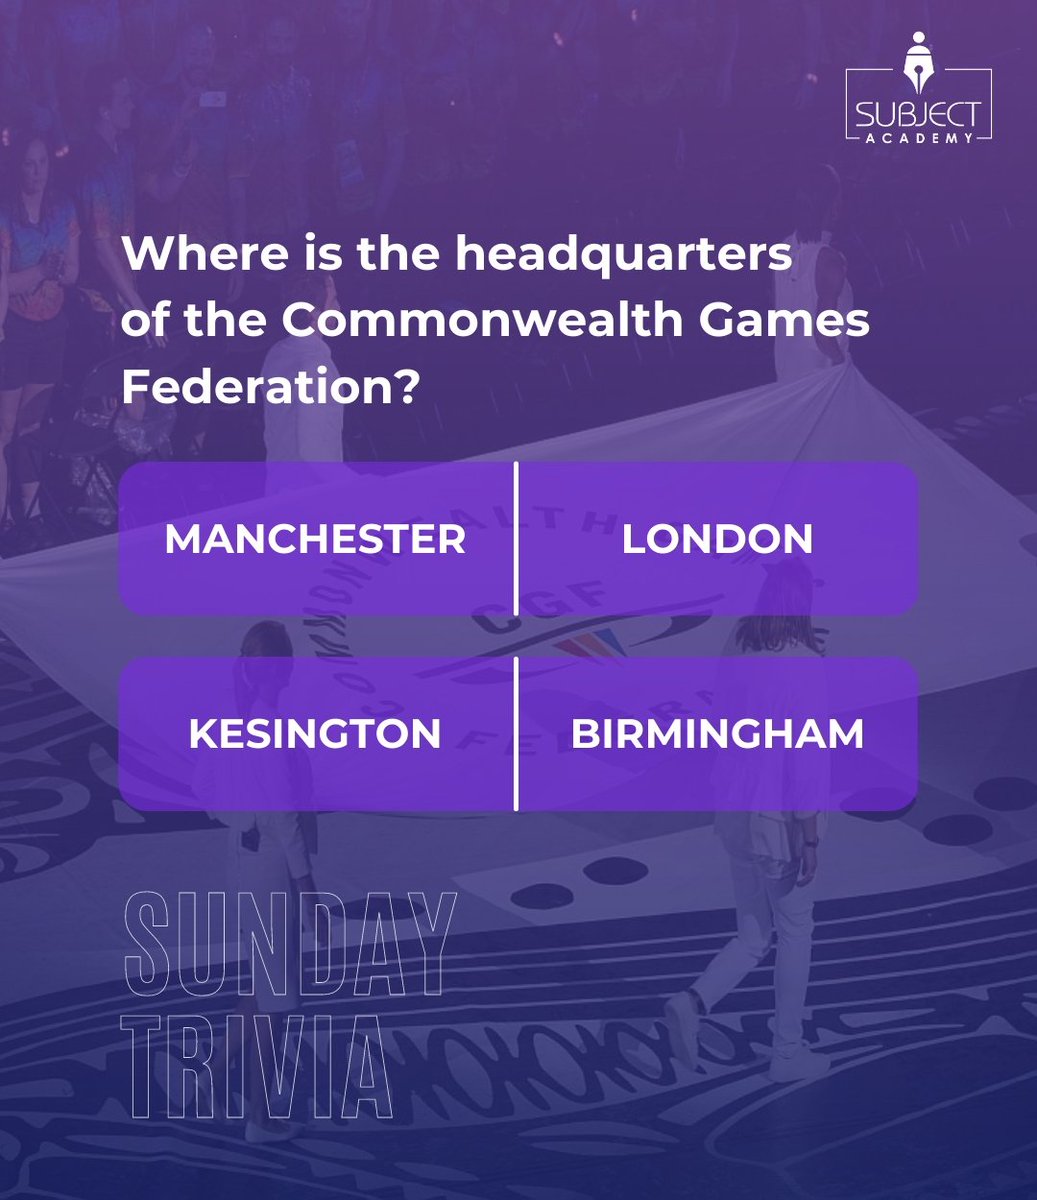 Please provide your response in the comments section

Visit us on subjectacademy.com
DM or WhatsApp @ +61390169018
.
.
.
#commonwealthsport #commonwealthgames #funfacts #sports #trivia #questionoftheday #sundaytrivia